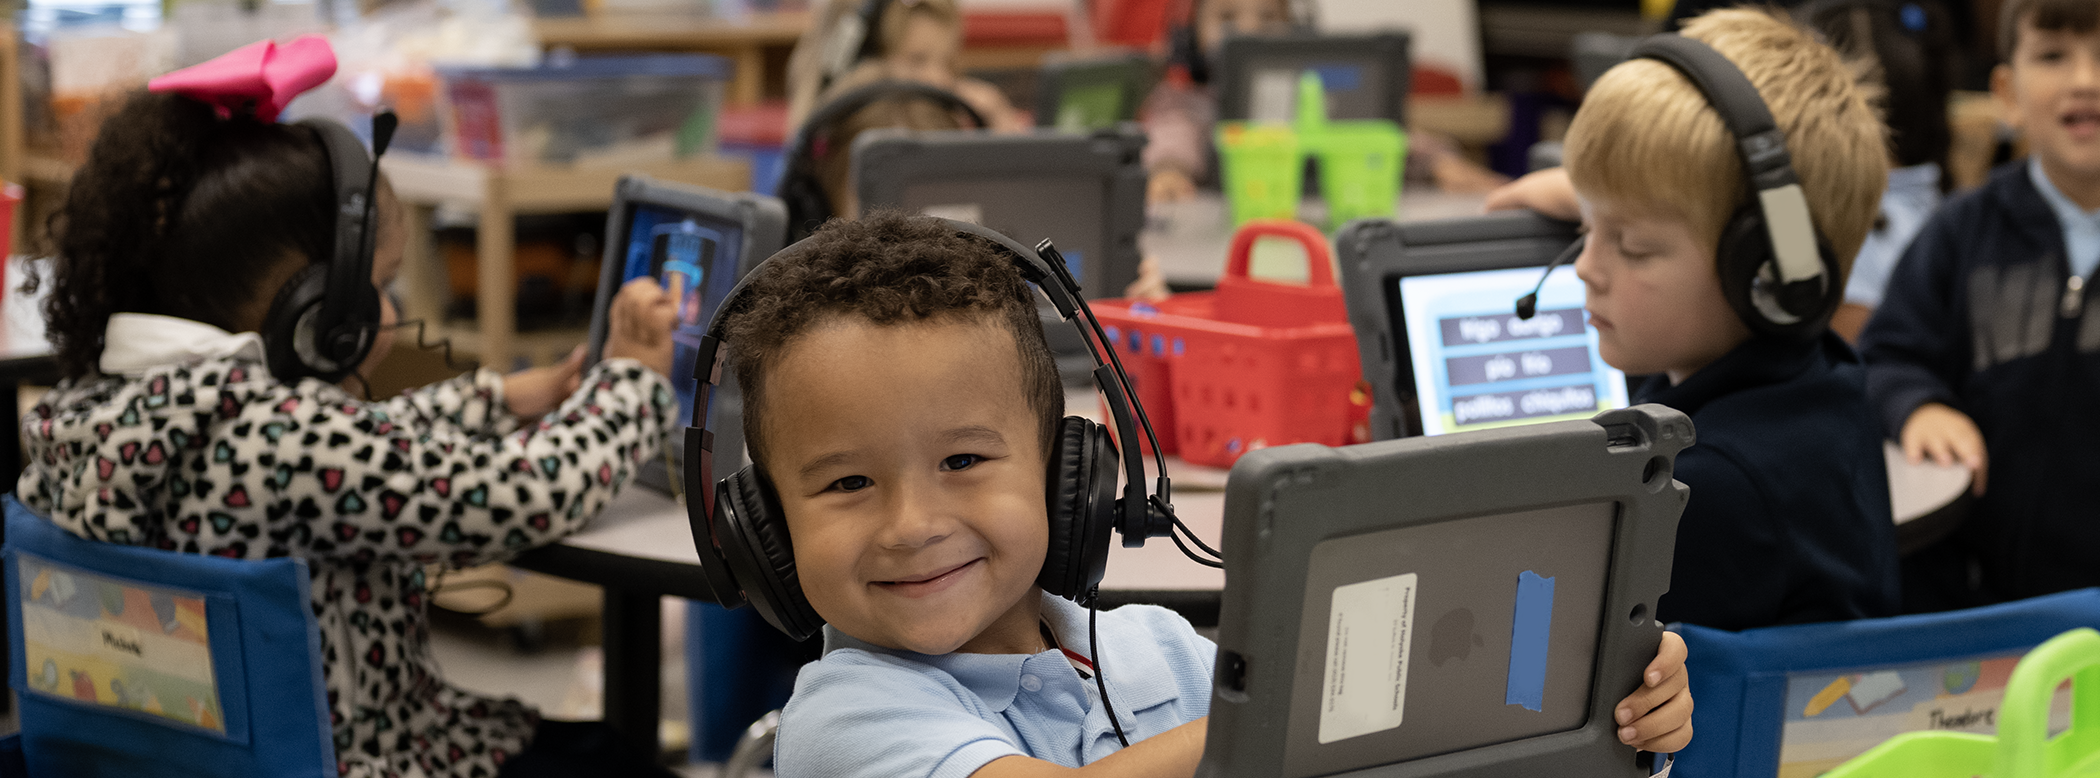 Smiling young boy wearing headset